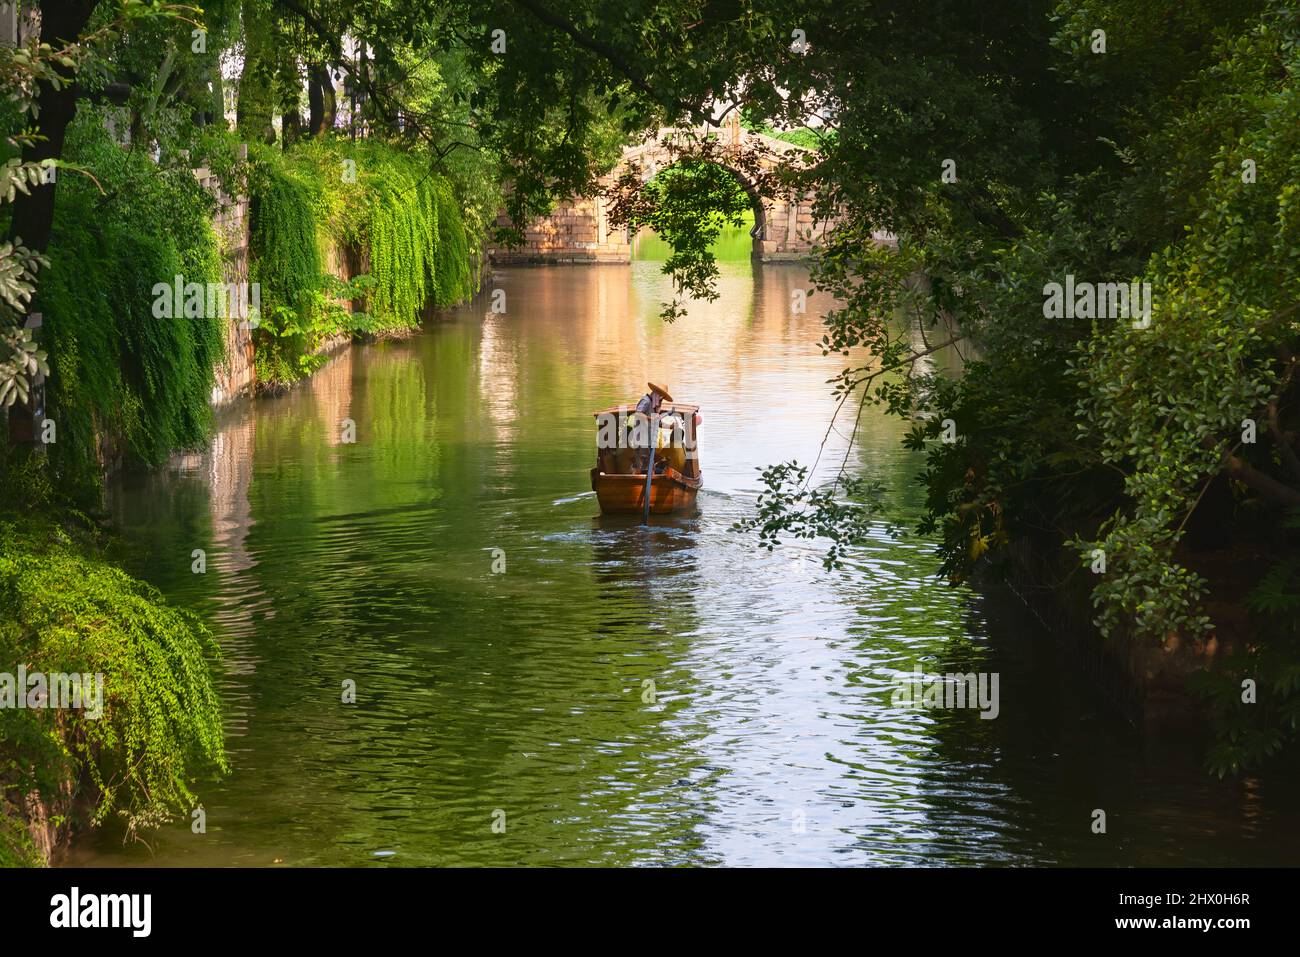 Suzhou, China - August 08, 2011: View of a canal in Tiger Hill Park. This park is a popular tourist destination and is known for its natural beauty Stock Photo